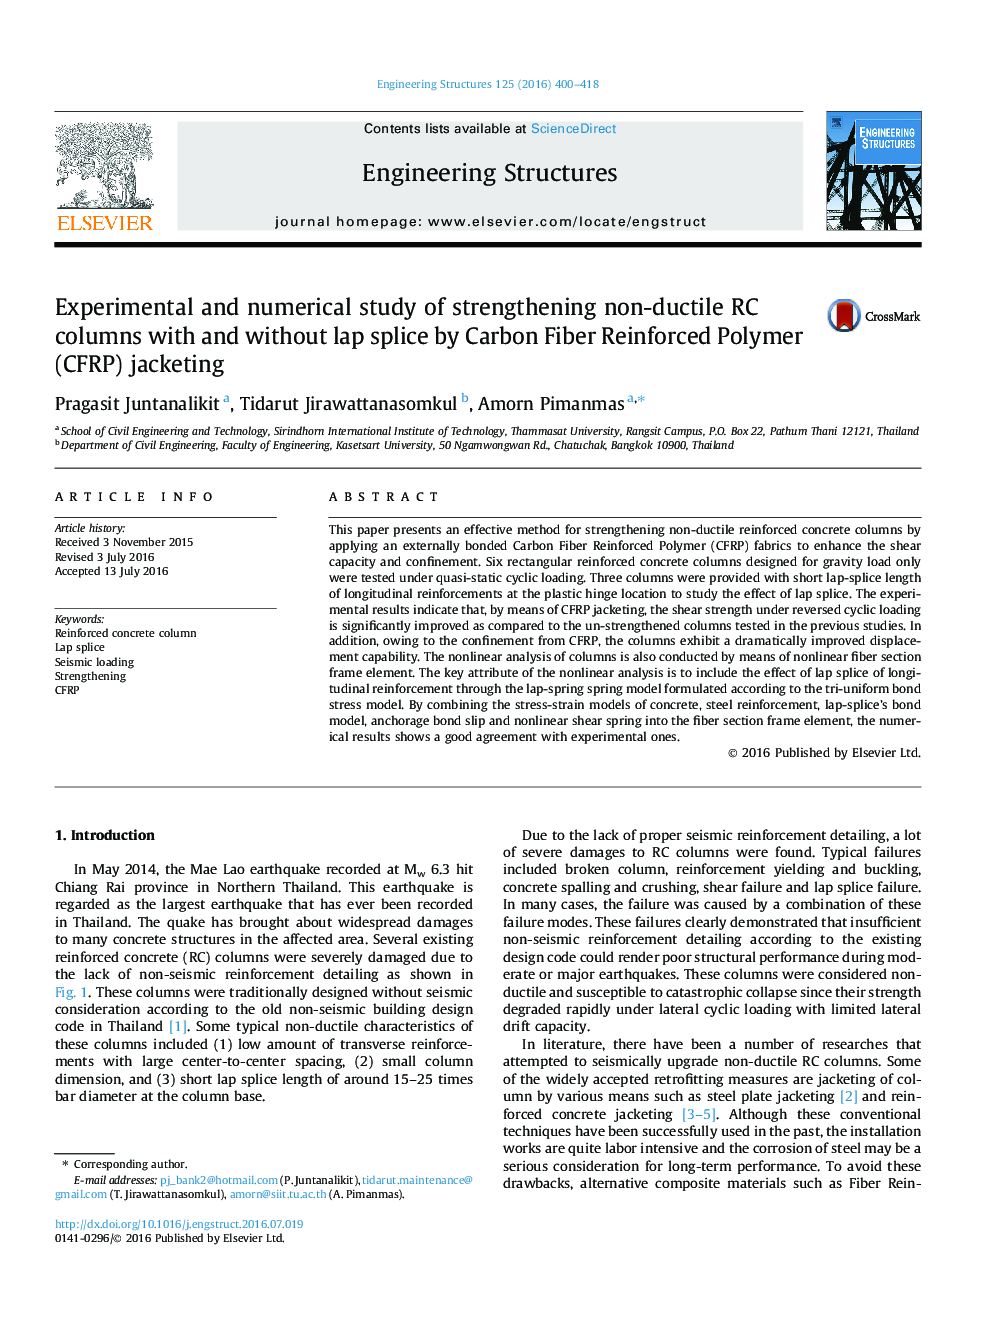 Experimental and numerical study of strengthening non-ductile RC columns with and without lap splice by Carbon Fiber Reinforced Polymer (CFRP) jacketing